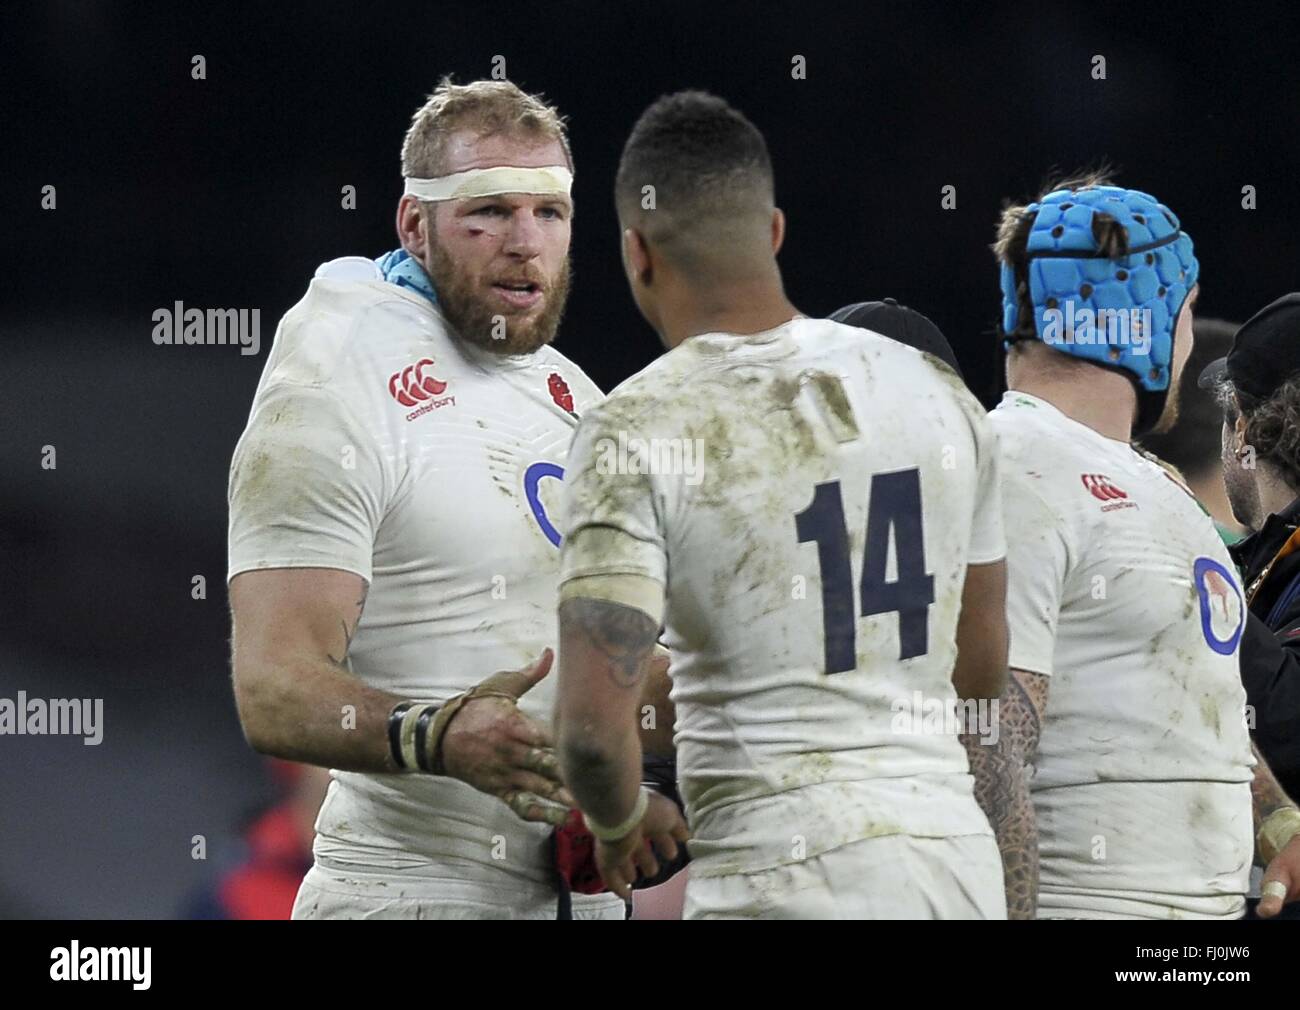 London, UK. 27th Feb, 2016. James Haskell (England) and Anthony Watson (England) at the end of the game. England v Ireland. RBS 6 Nations. Twickenham Stadium. Twickenham. London. UK. 27/02/2016. Credit:  Sport In Pictures/Alamy Live News Stock Photo